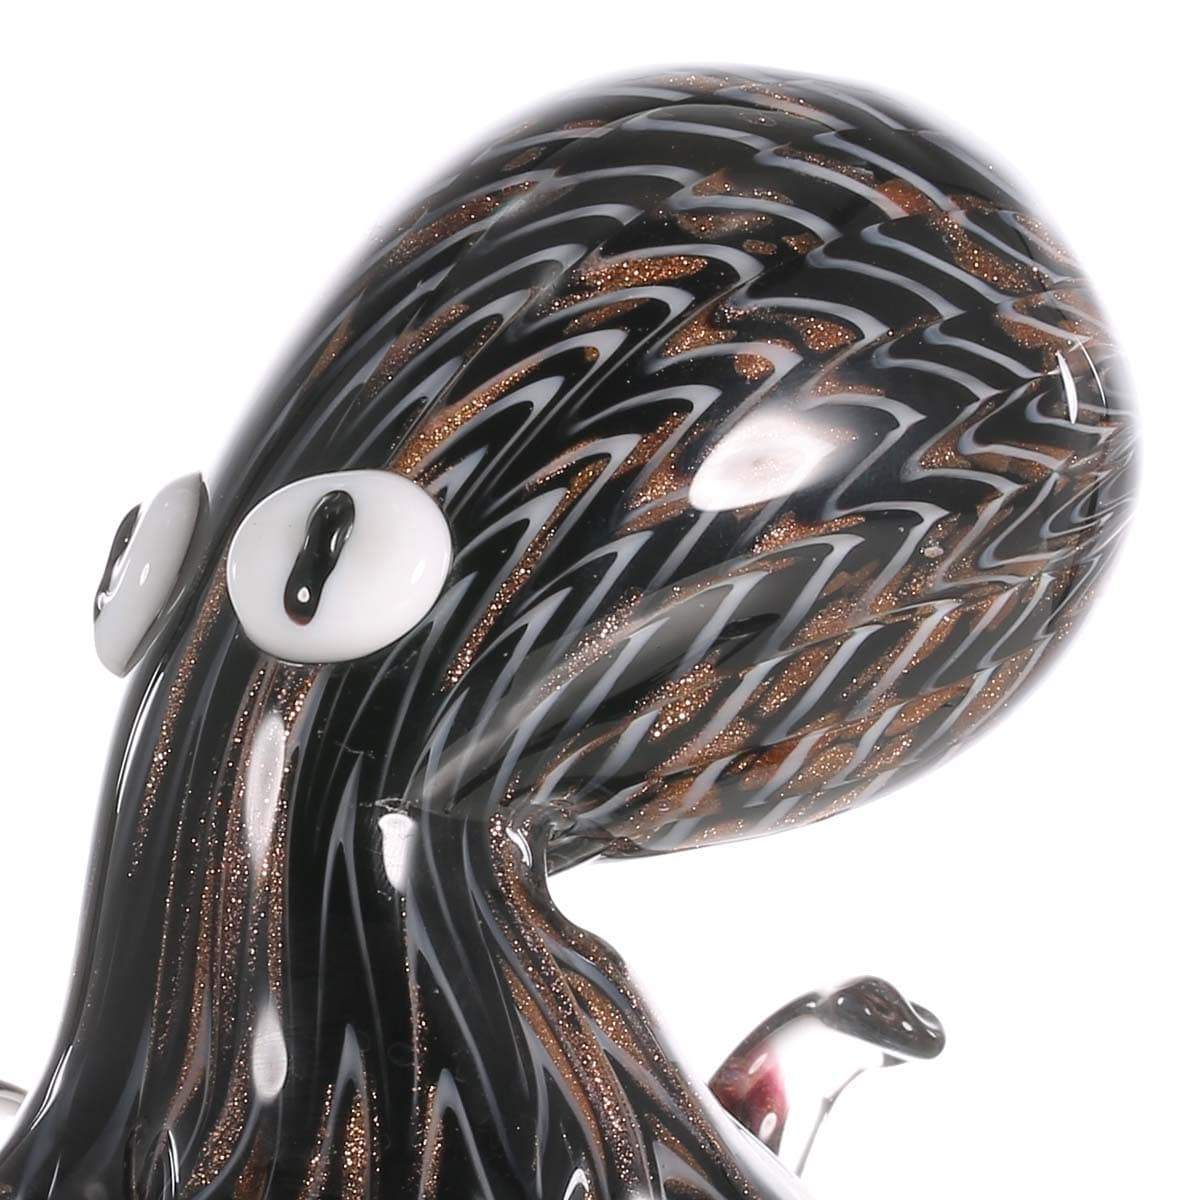 Fashionable & Elegant Octopus Sculpture - Eye-Catching on First Sight